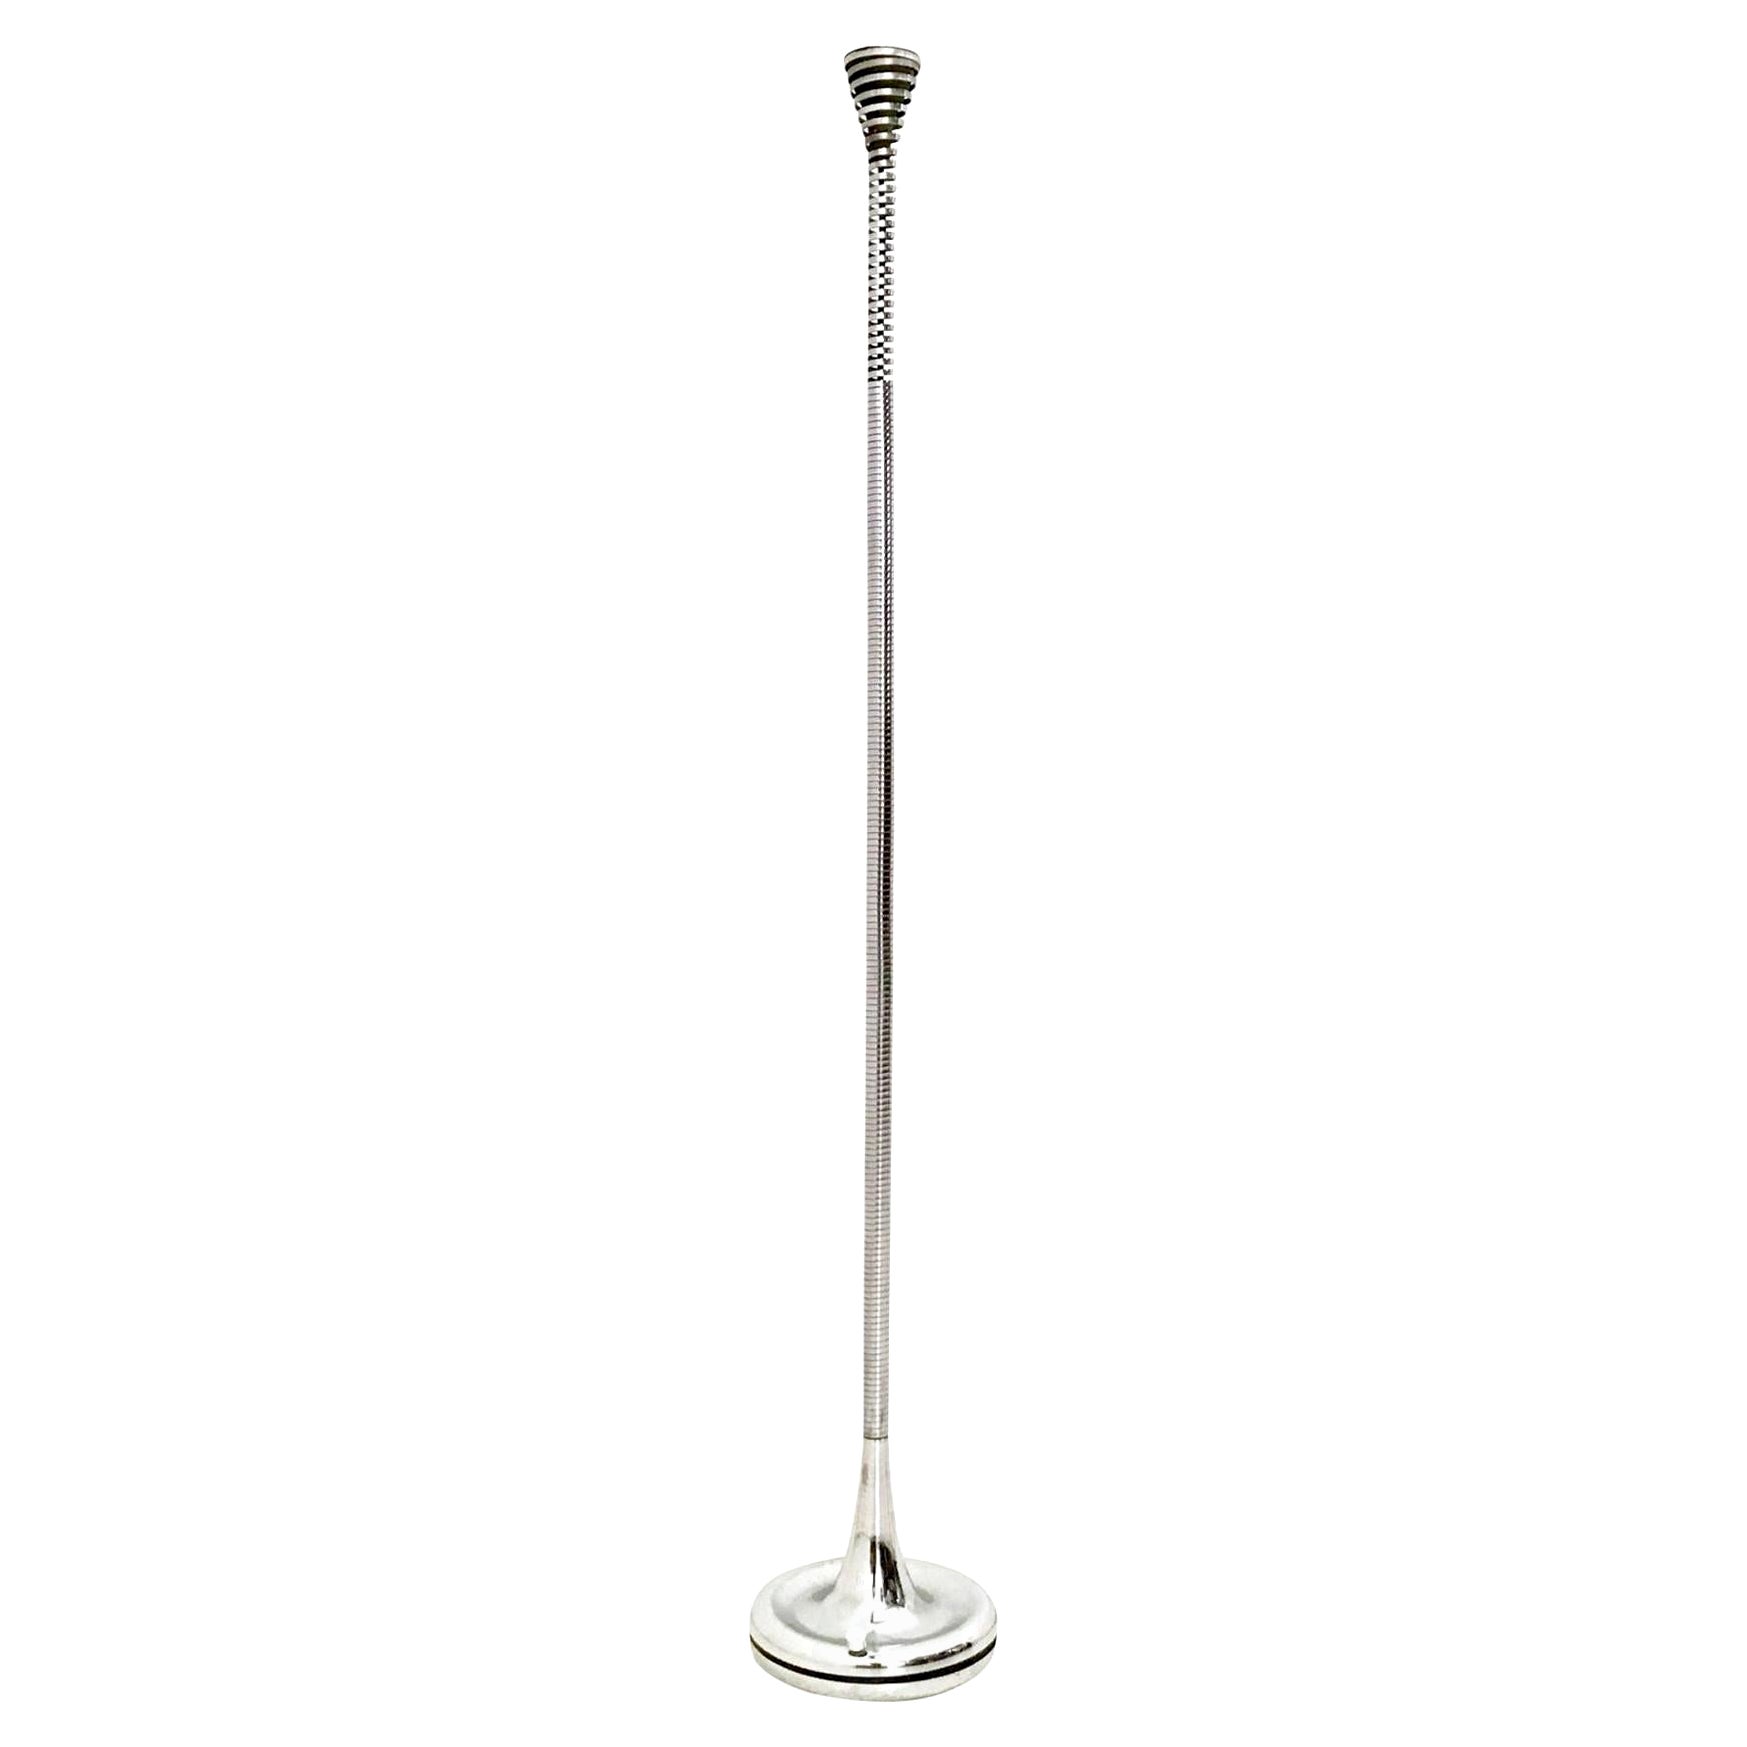 Postmodern Steel Floor Lamp by Eleonore Peduzzi Riva for Candle, Italy